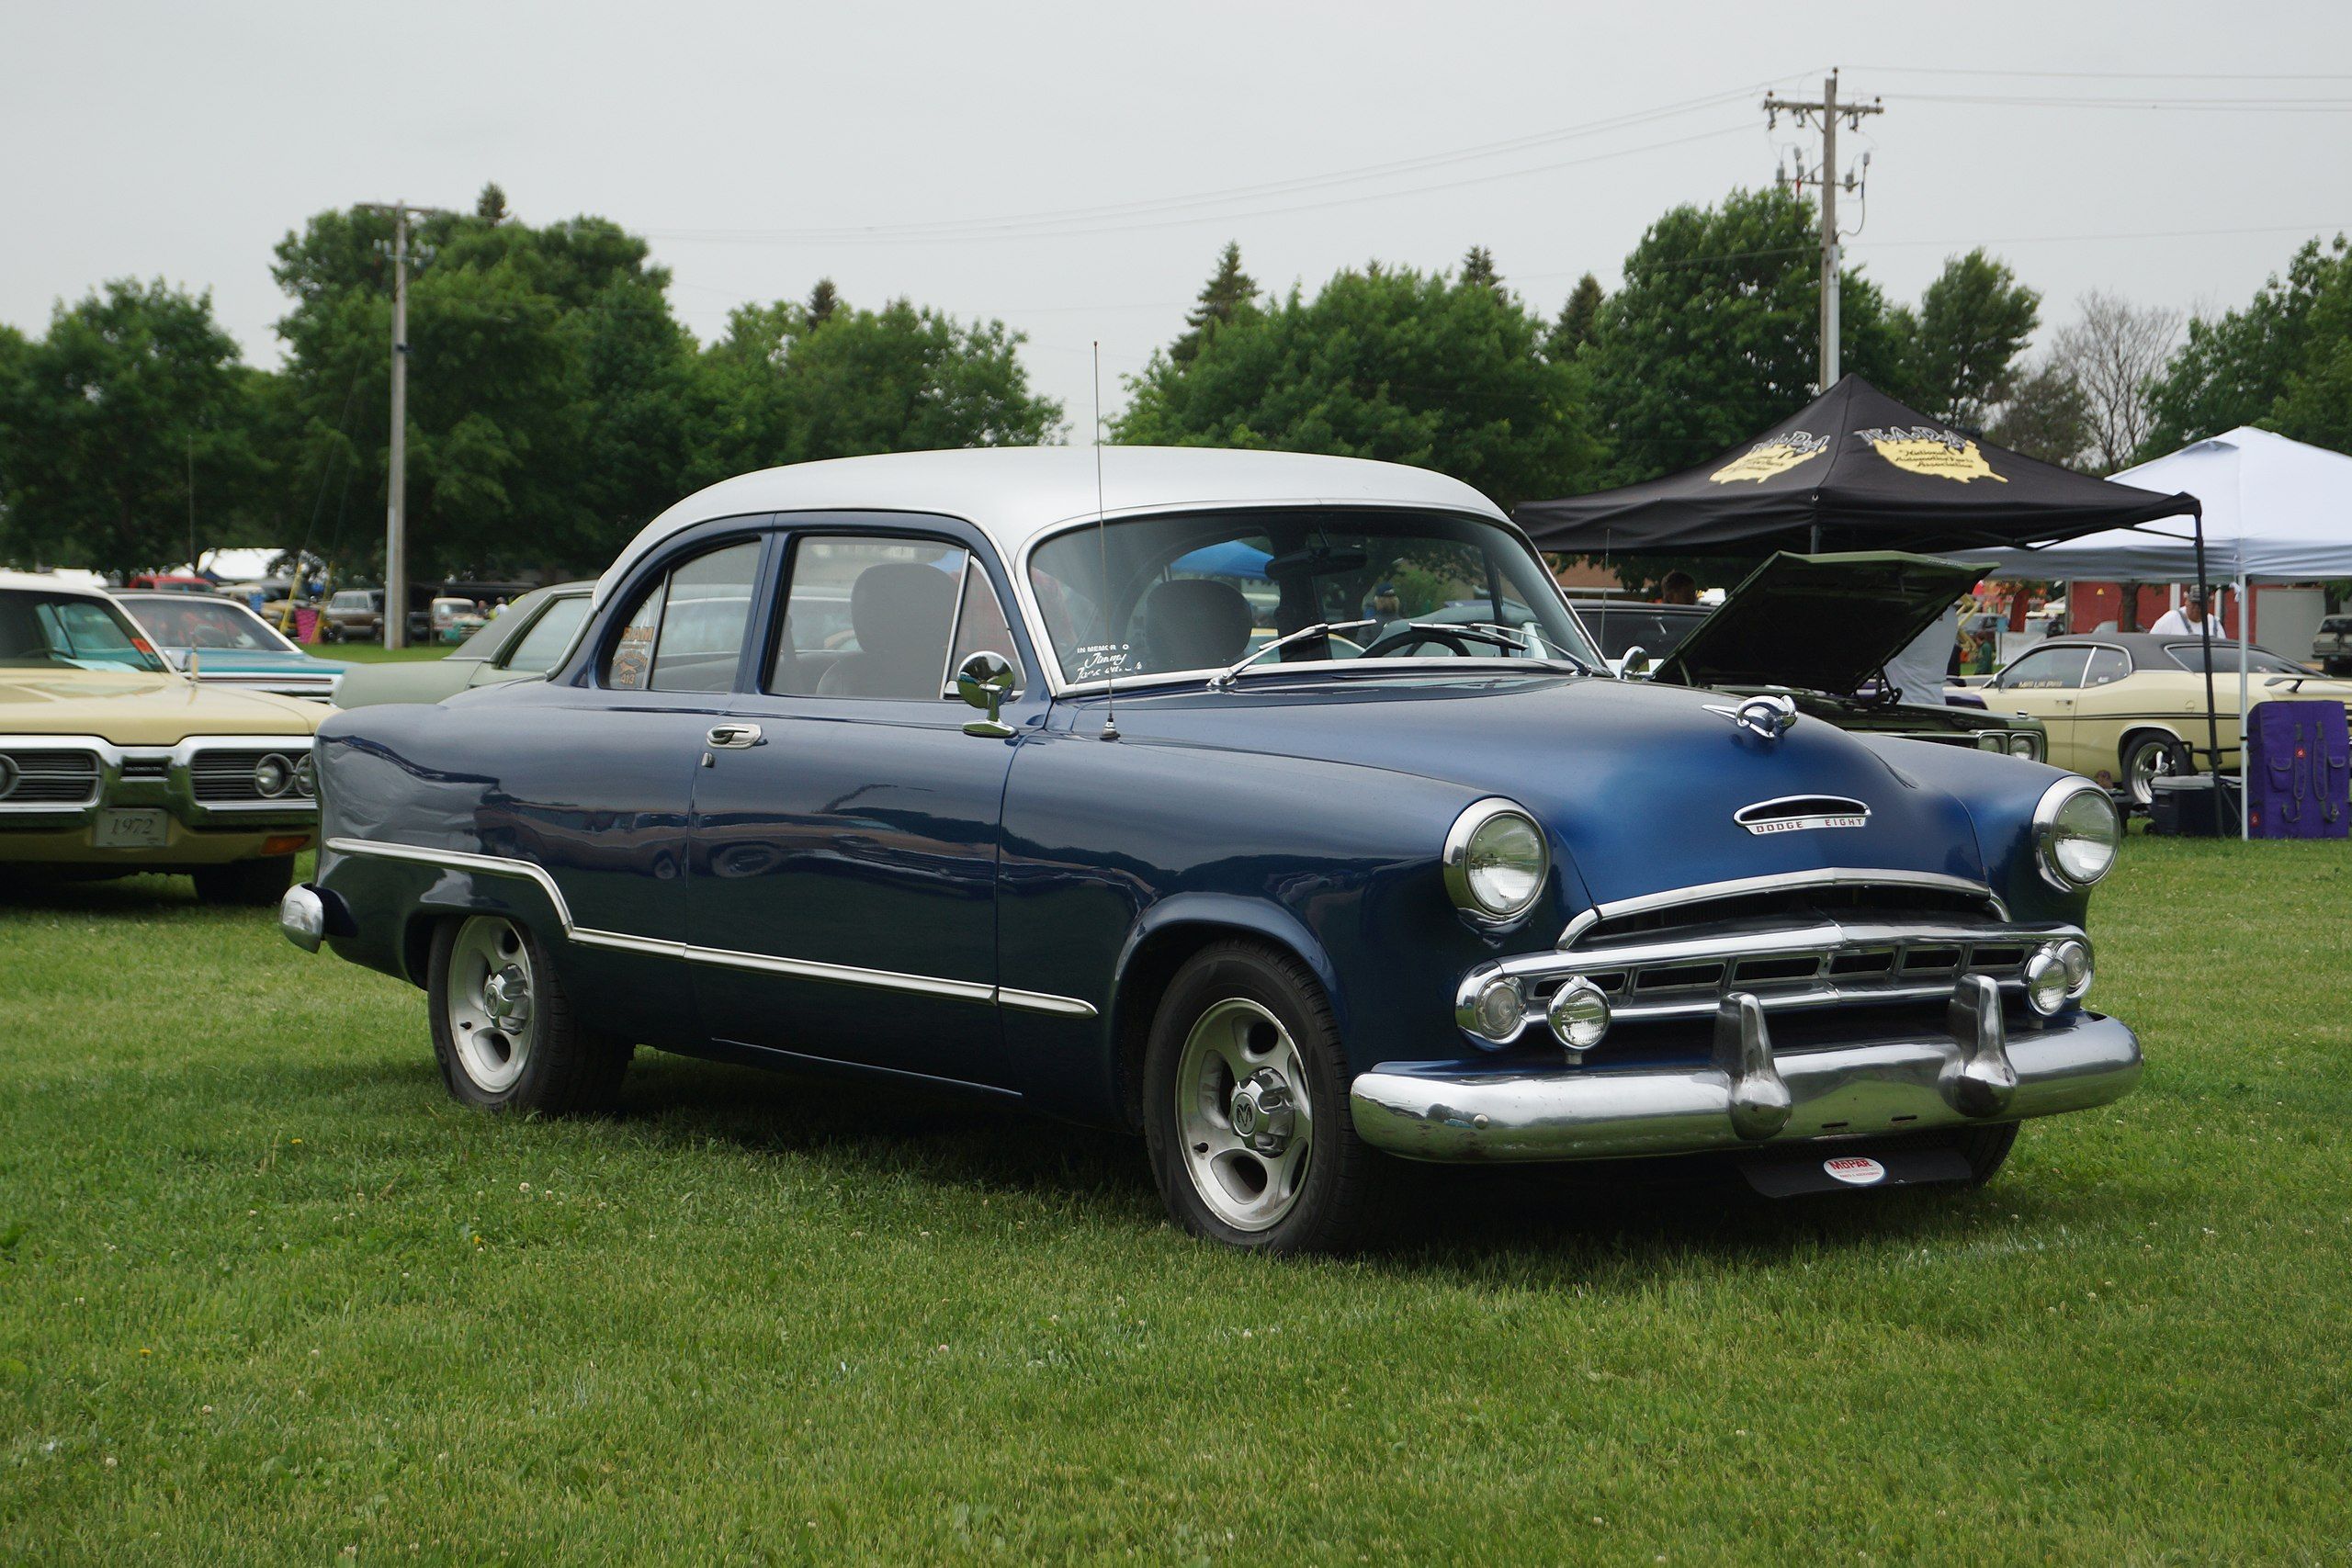 A parked 1953 Dodge Coronet